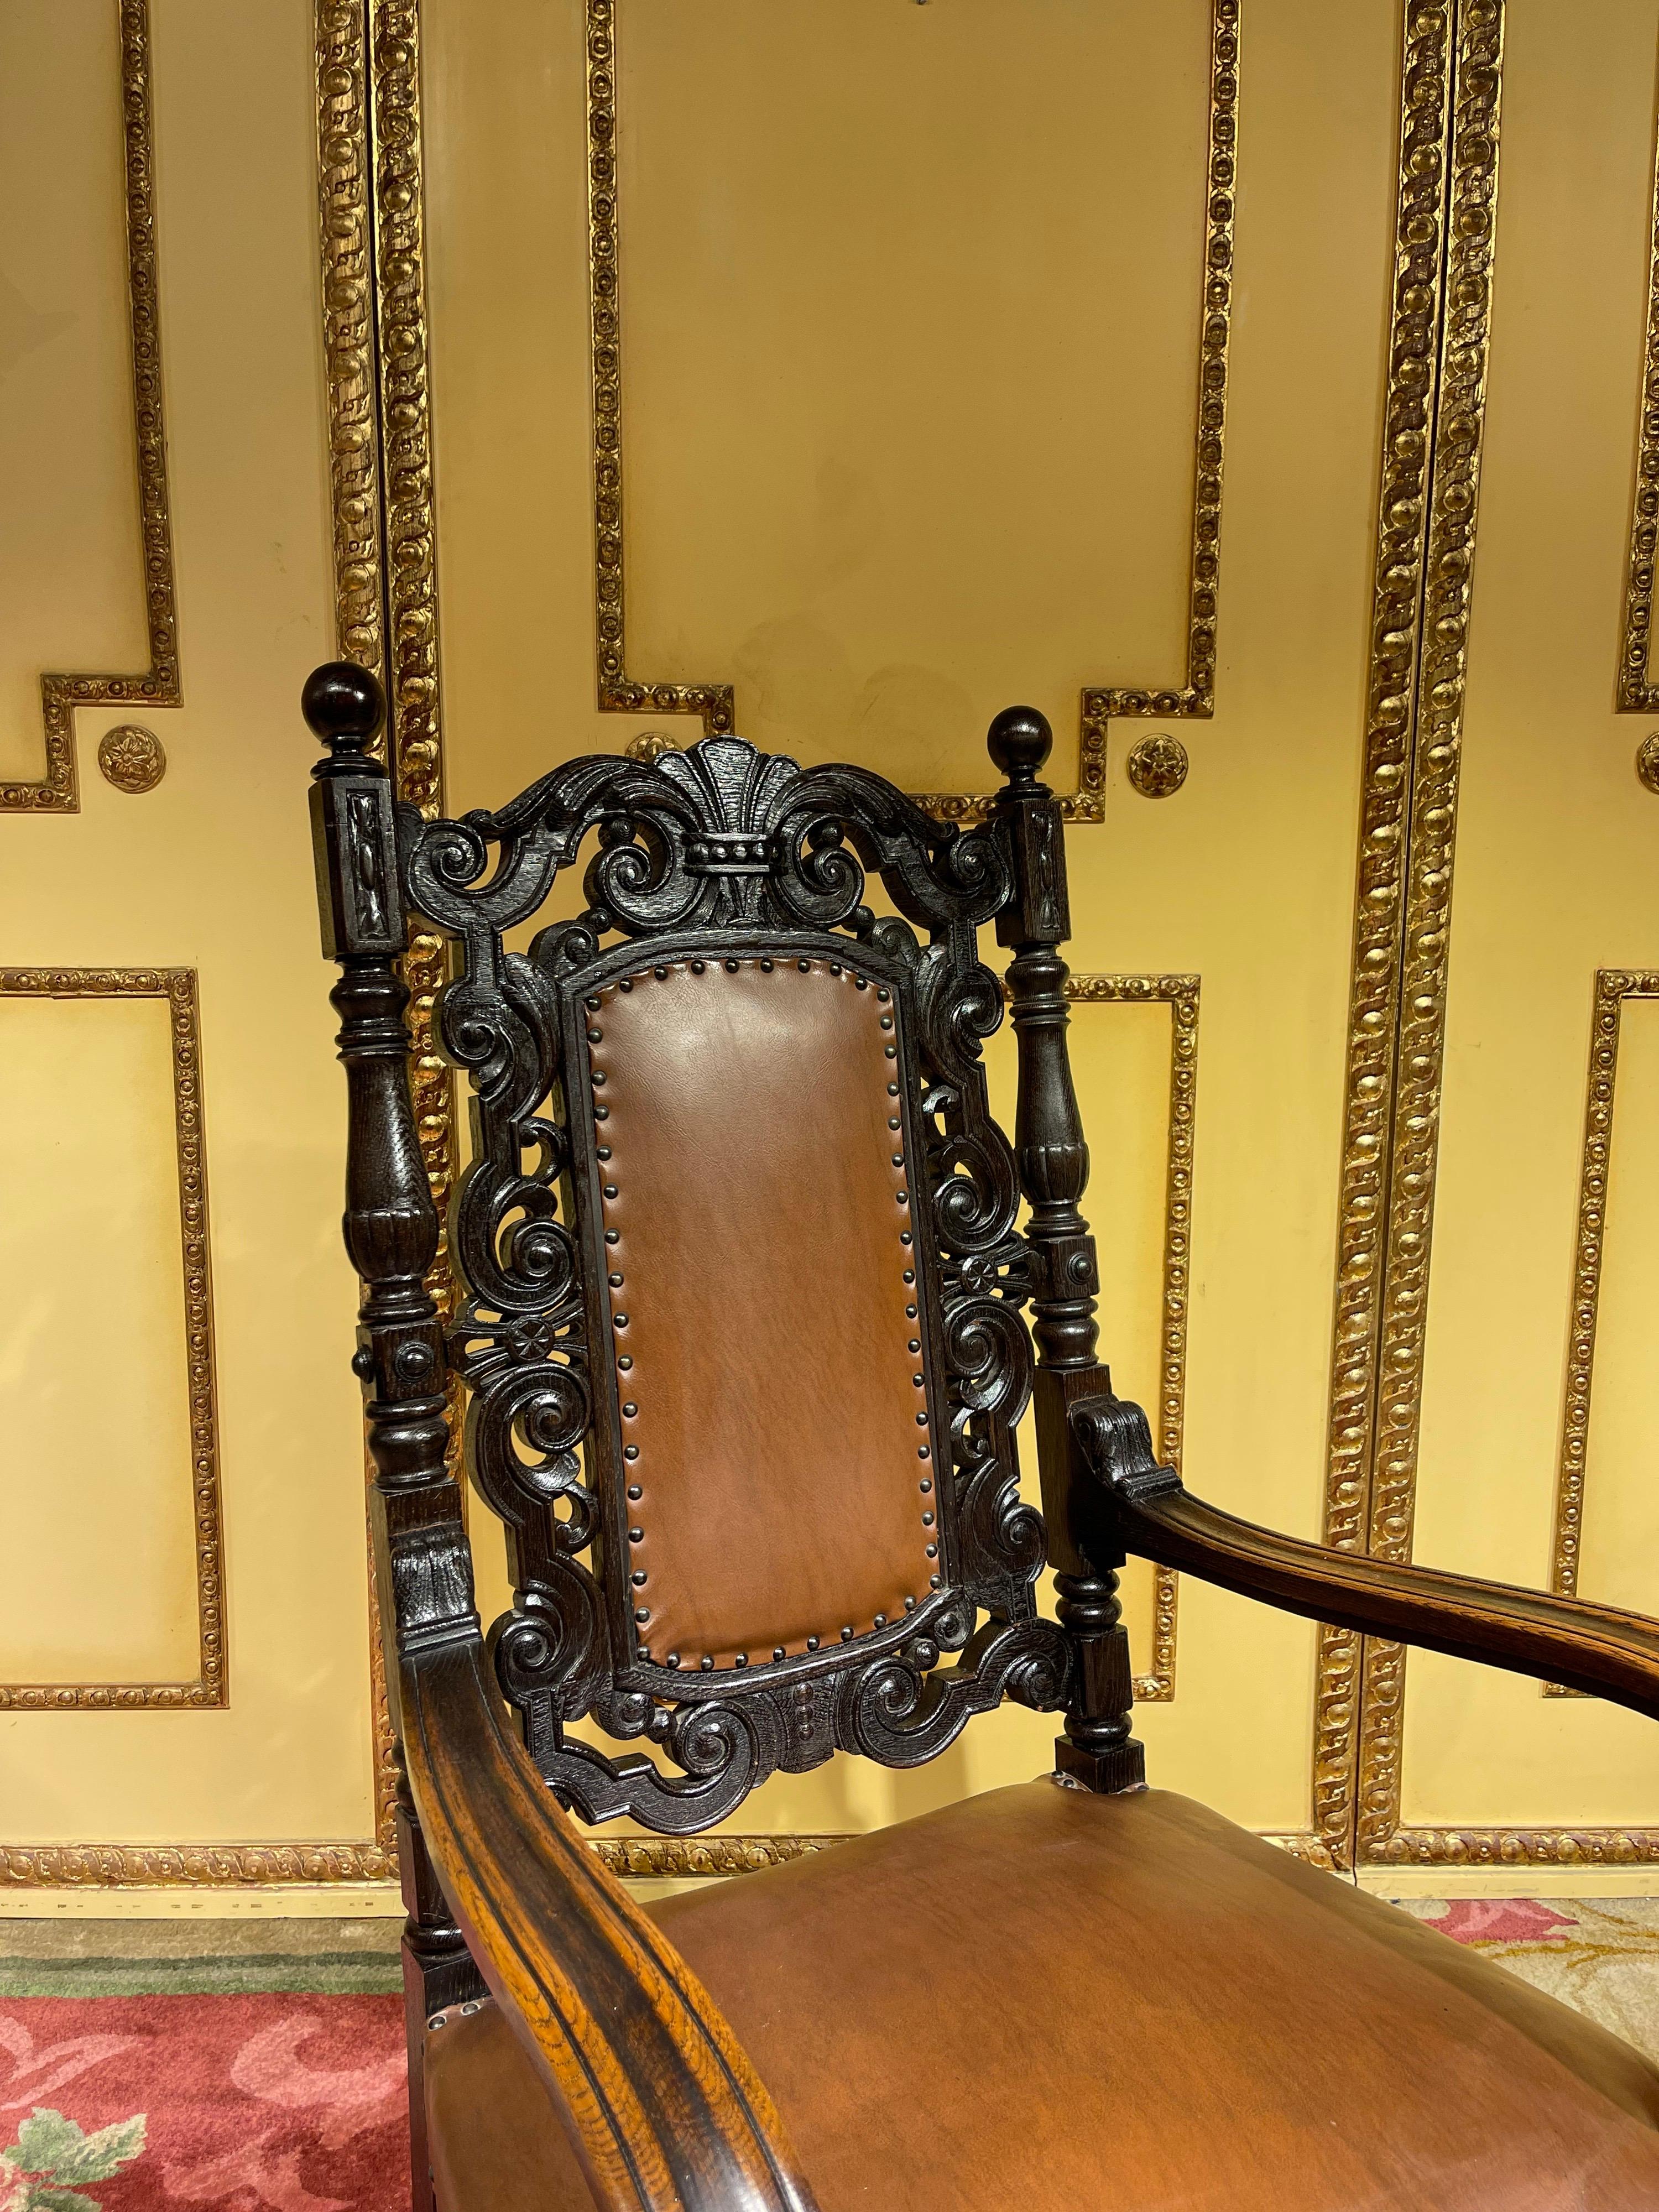 19th century throne chair, historicism around 1880, oak.

Stately throne made of solid oak, hand-carved and blackened. High quality carved. Seat upholstery covered with leather.
Germany around 1880, historicism.